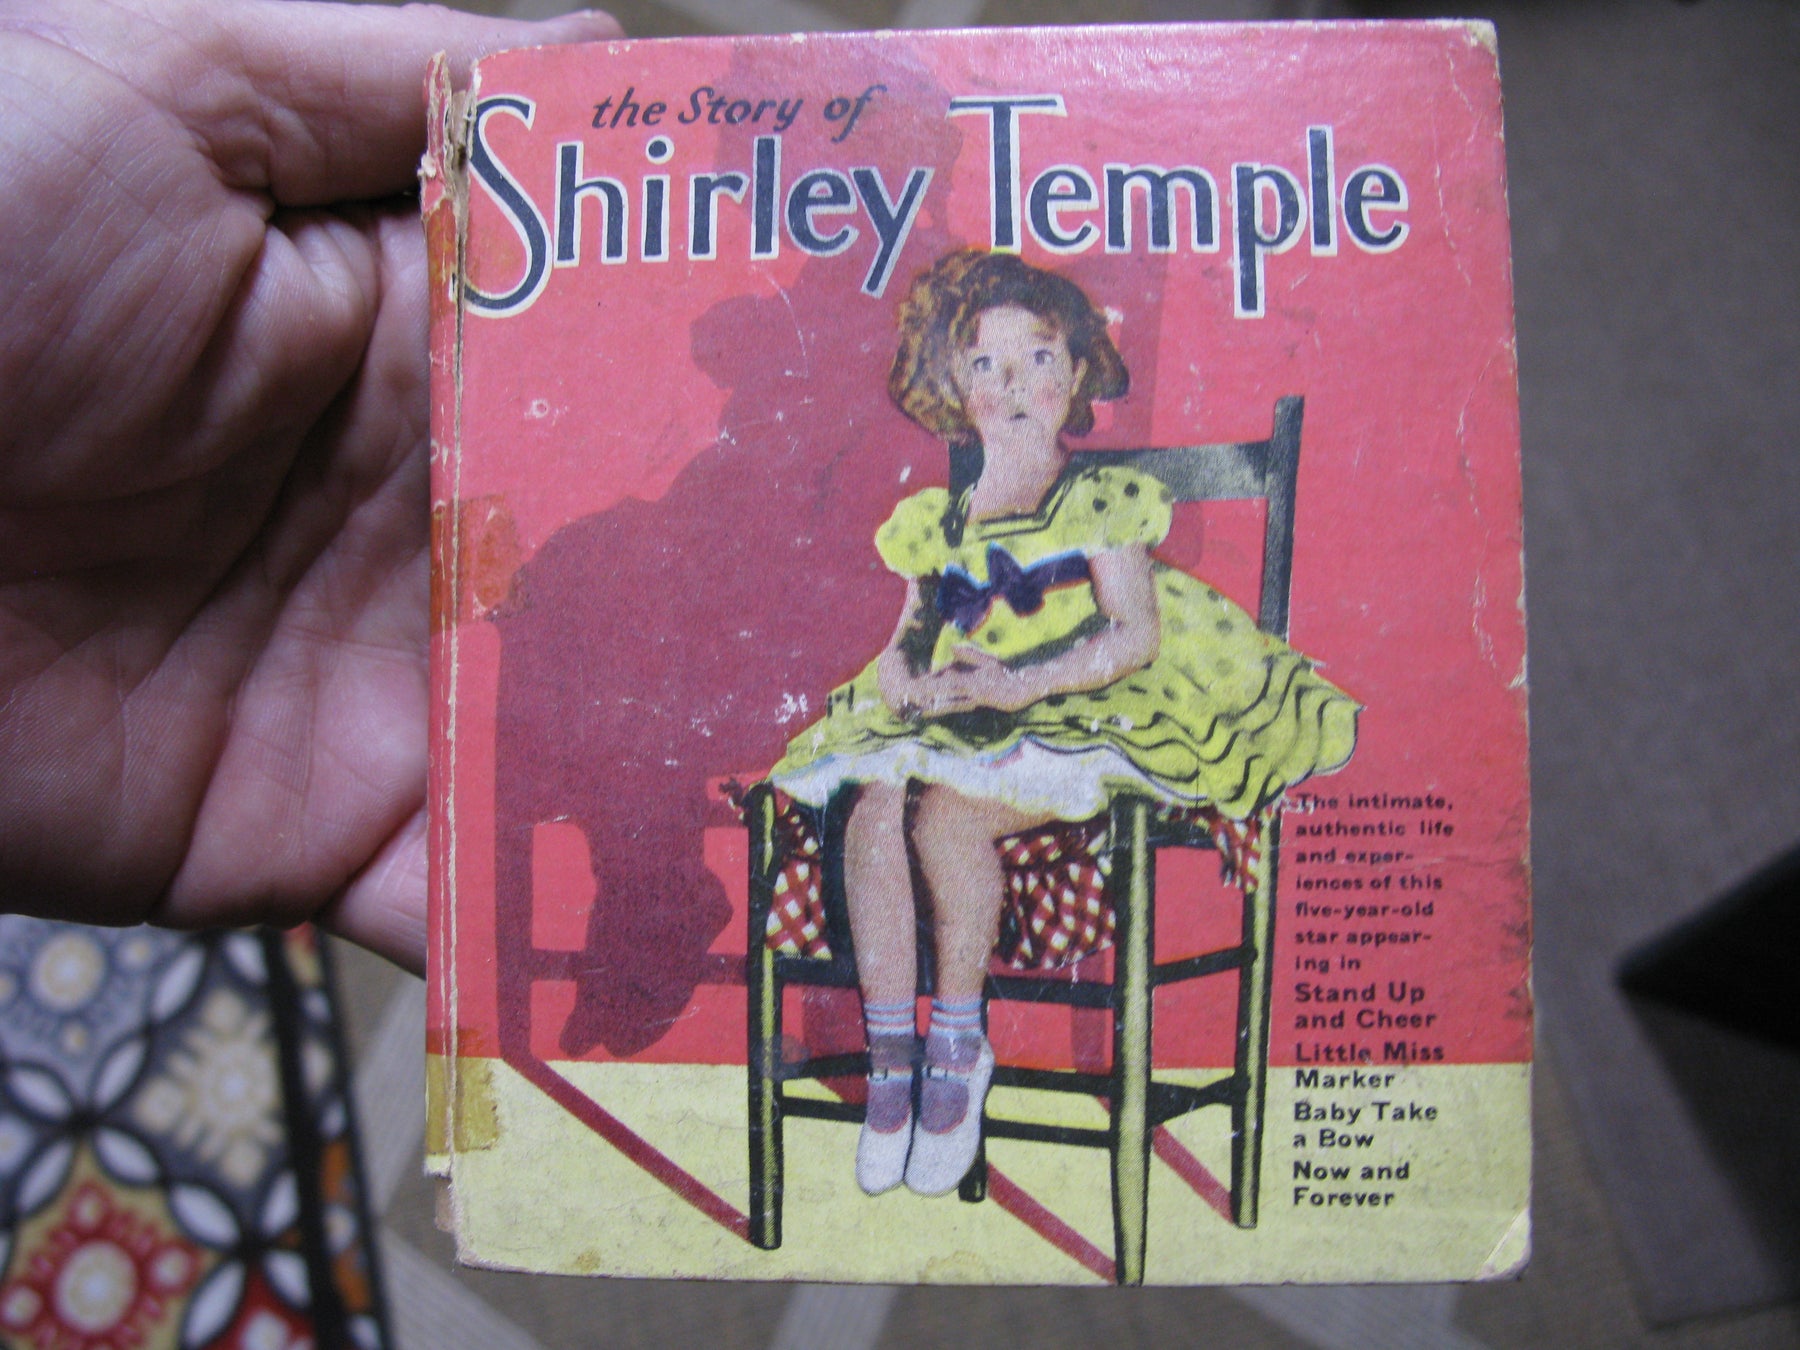 The Story of Shirley Temple by Grace Mack